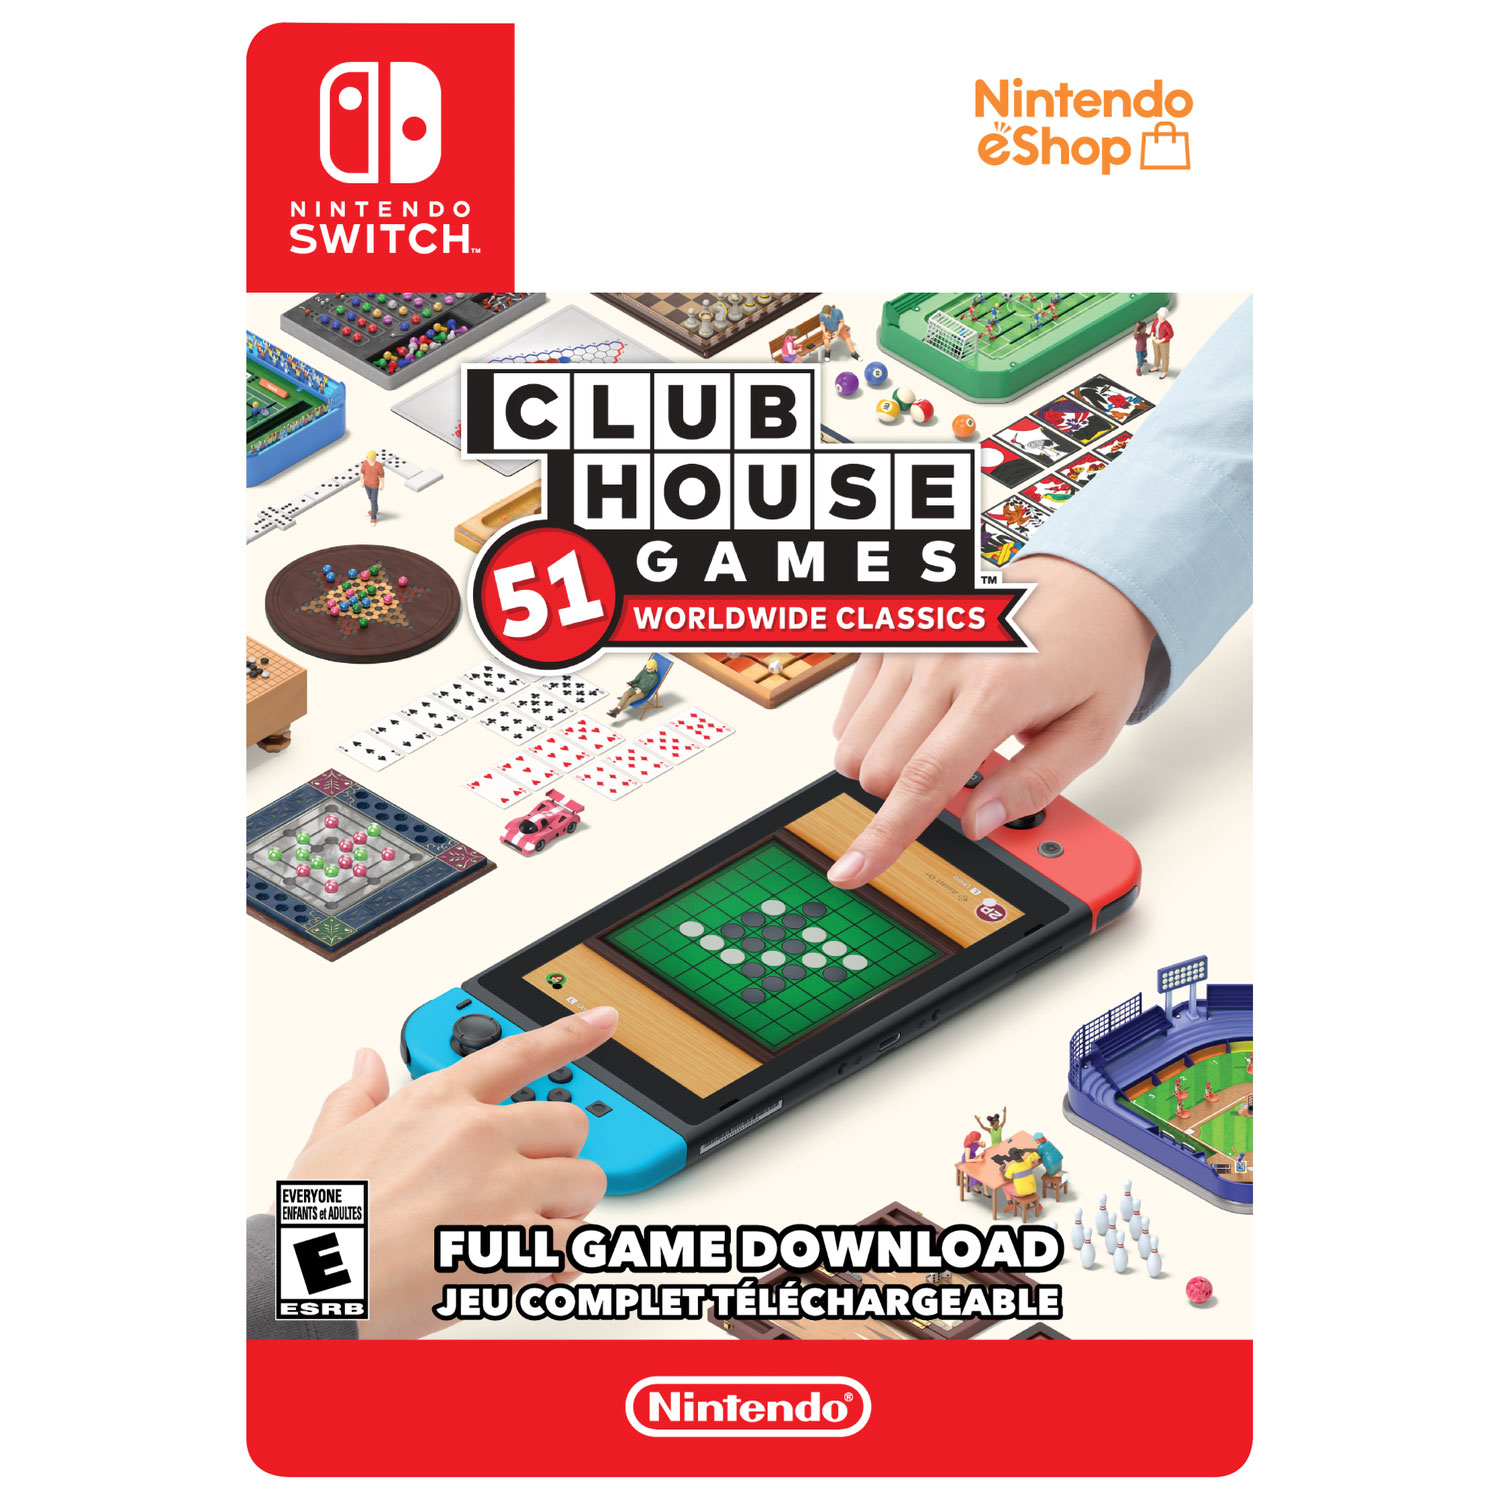 clubhouse games 51 nintendo switch